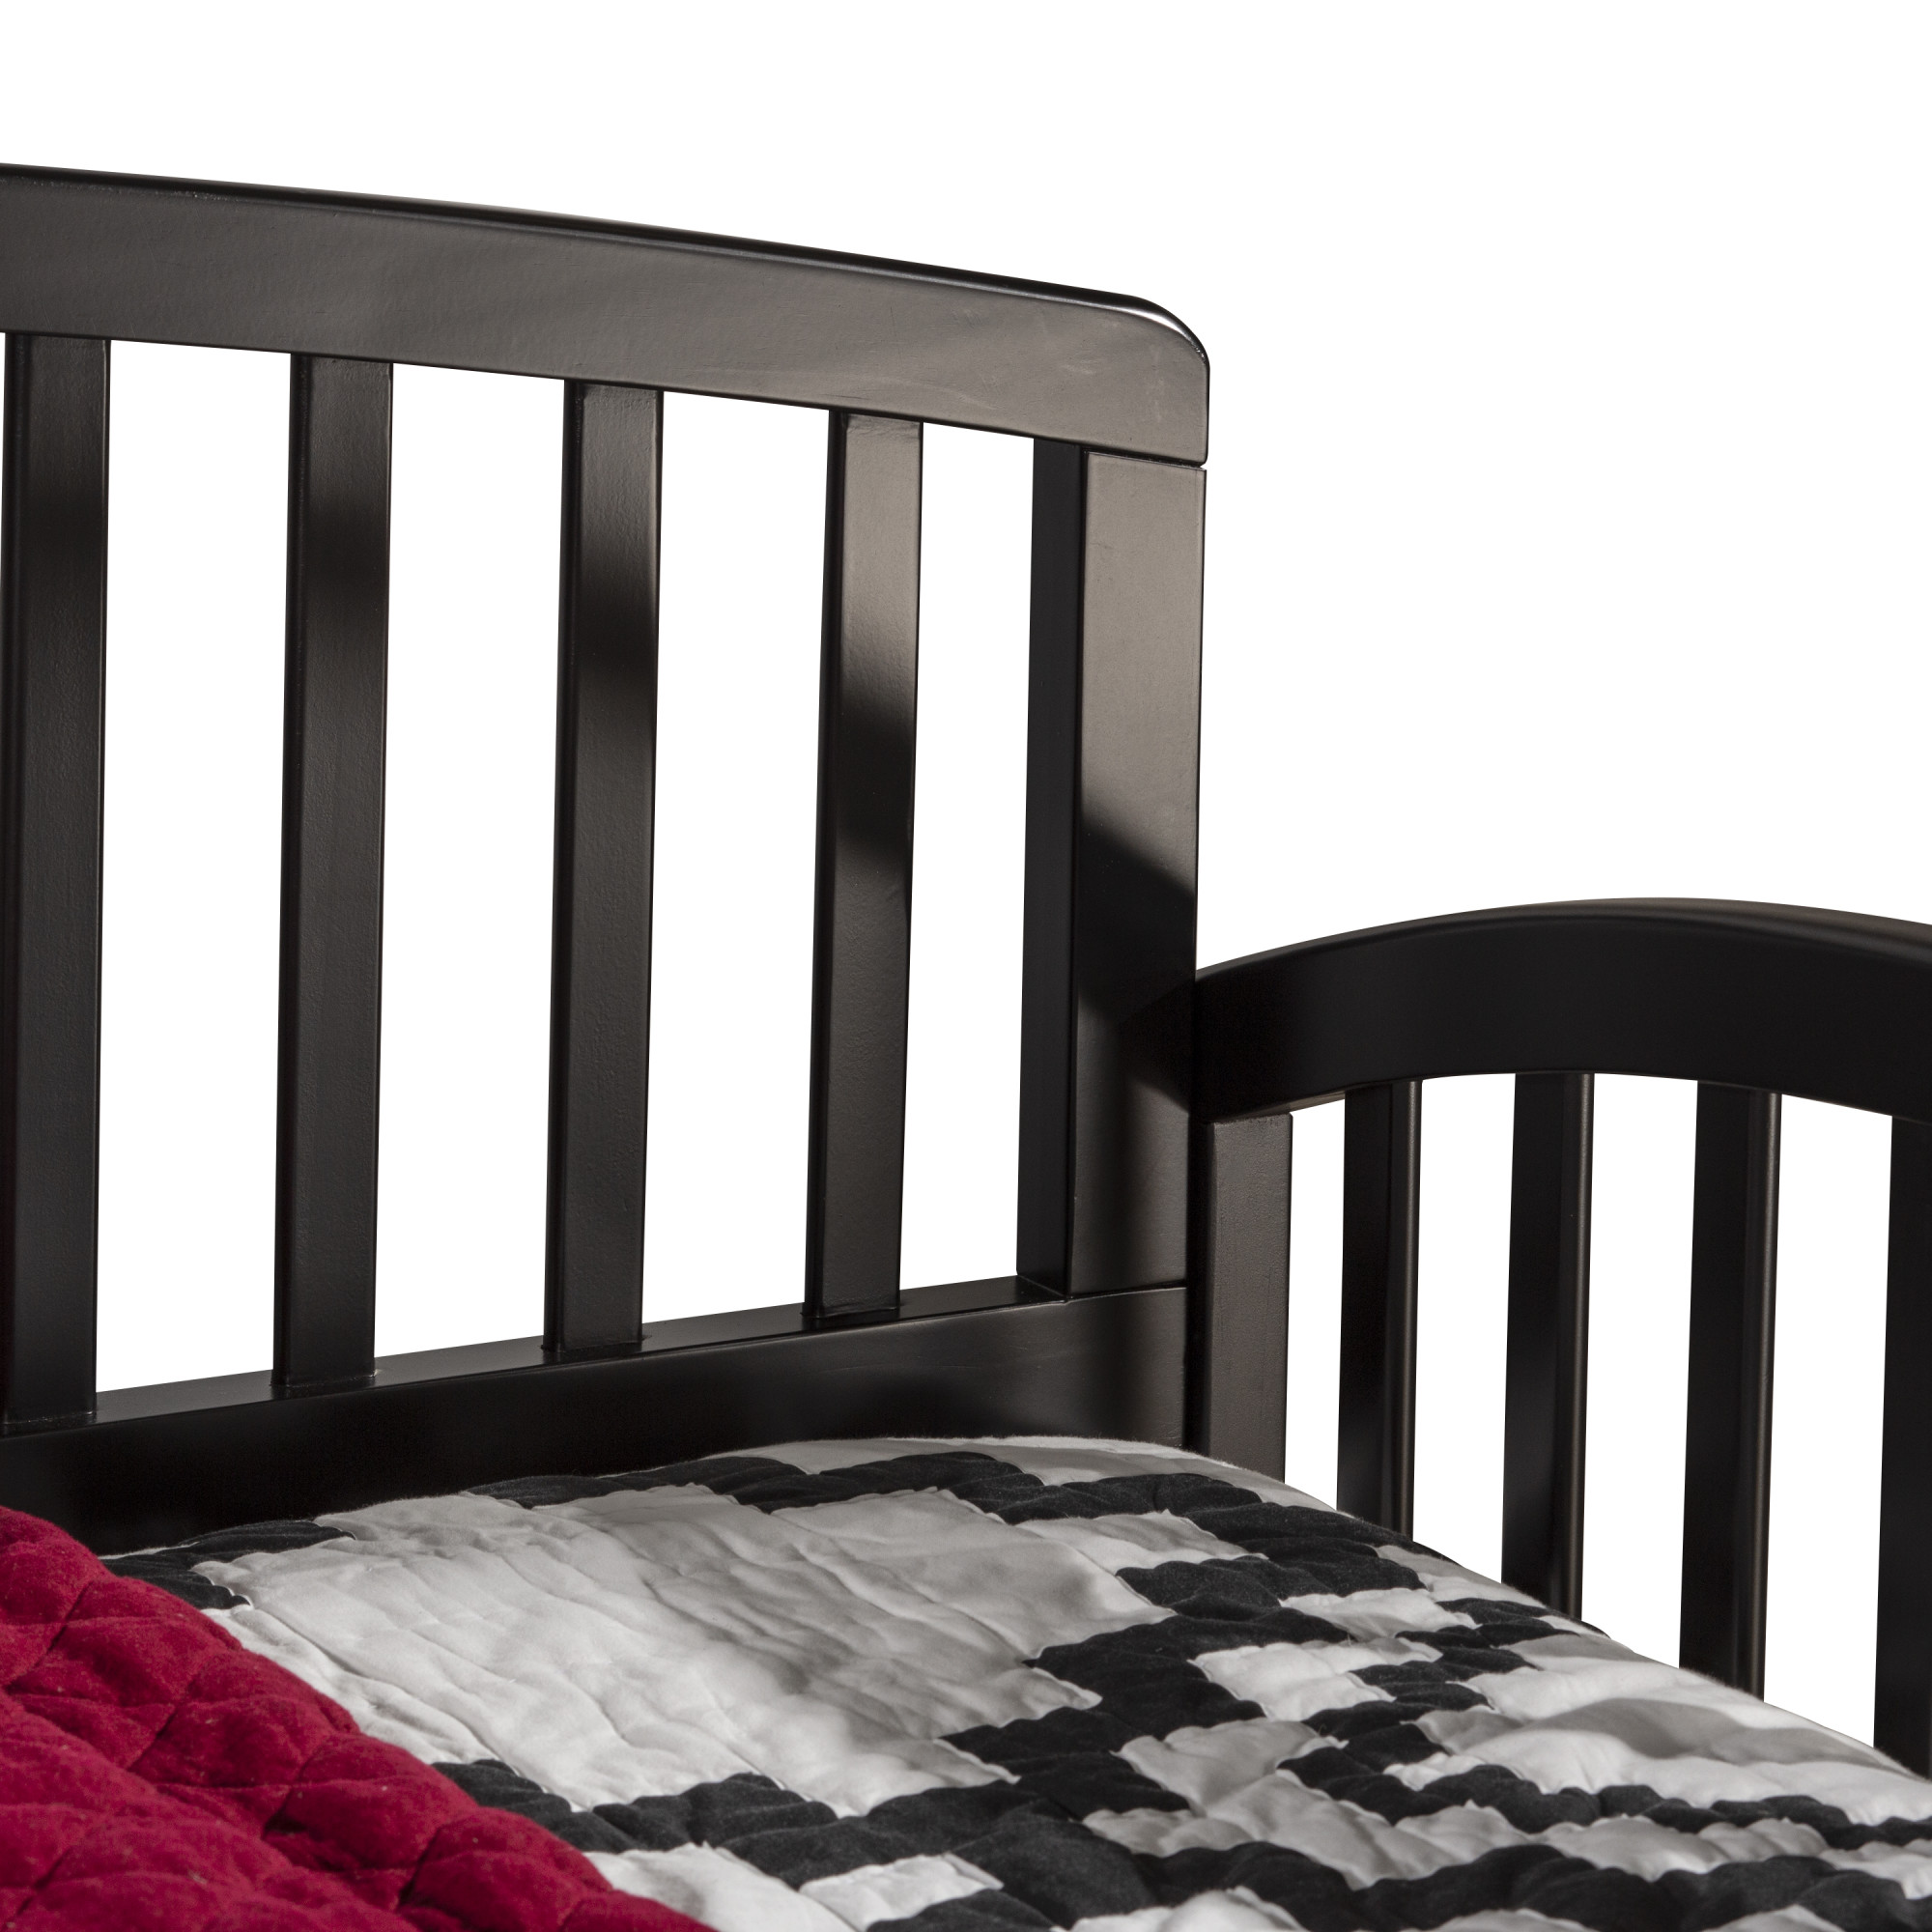 Hillsdale Furniture Carolina Wood Twin Daybed, Rubbed Black - image 2 of 11